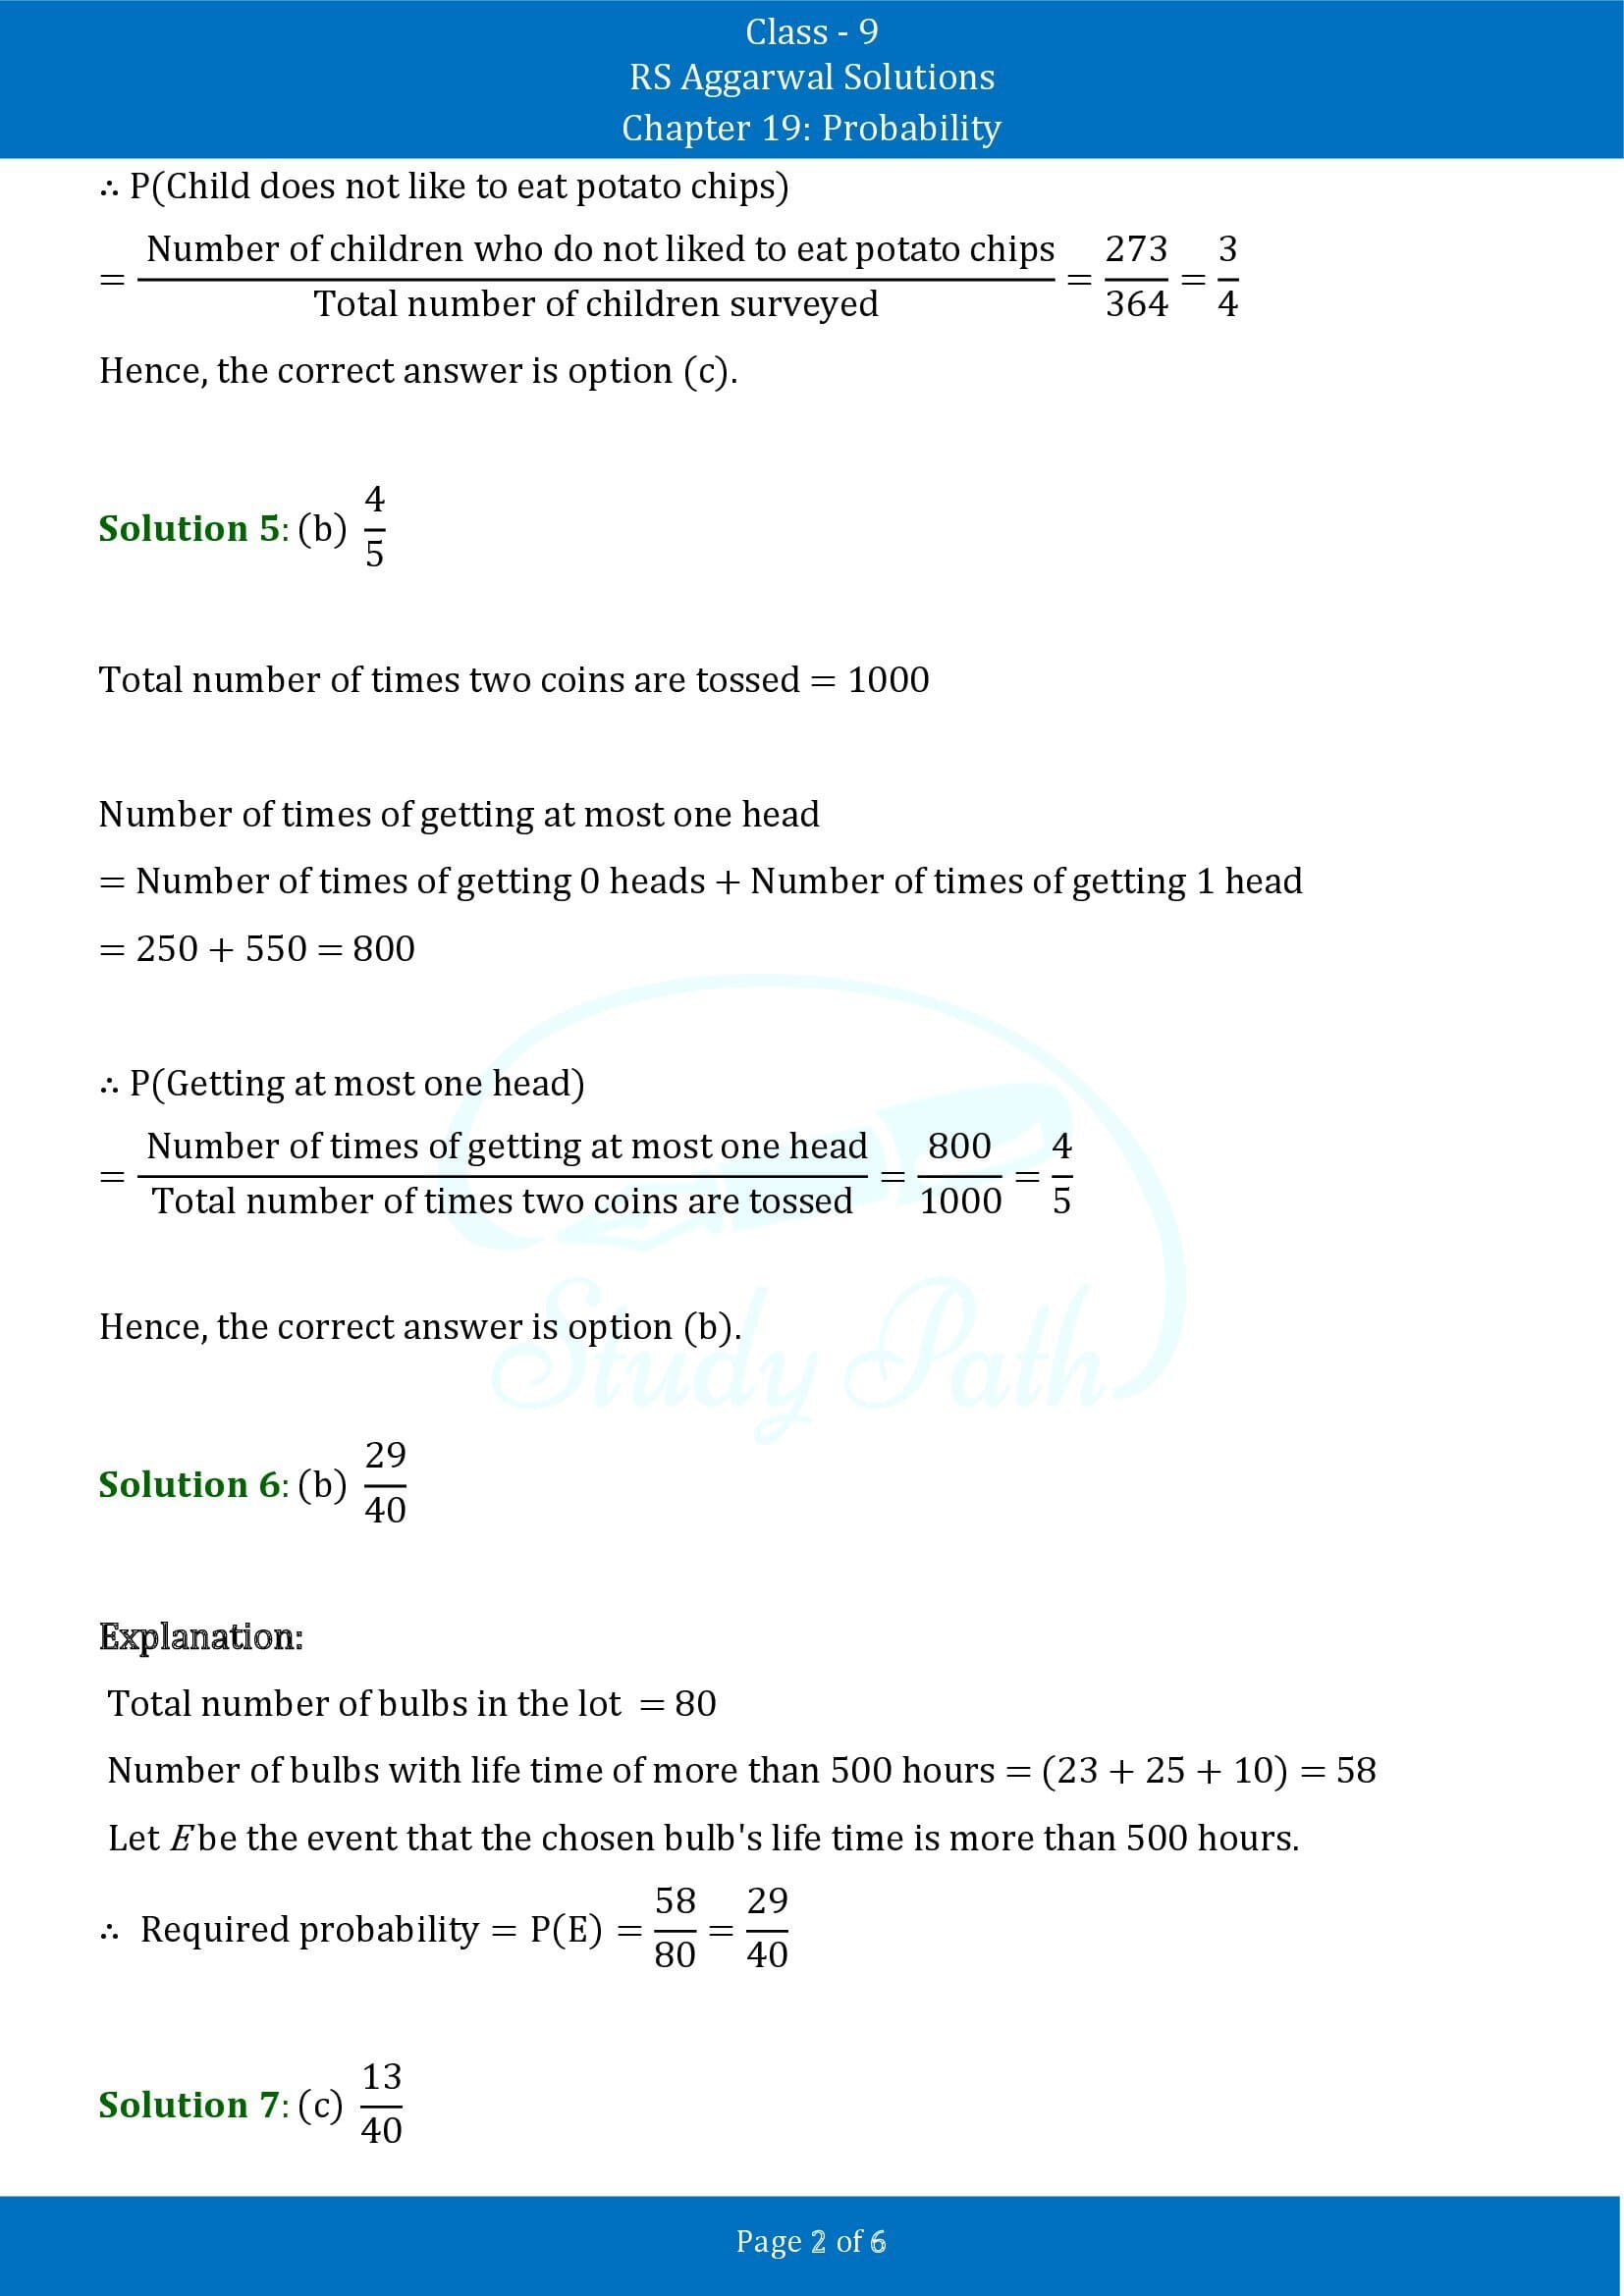 RS Aggarwal Solutions Class 9 Chapter 19 Probability Multiple Choice Questions MCQs 00002